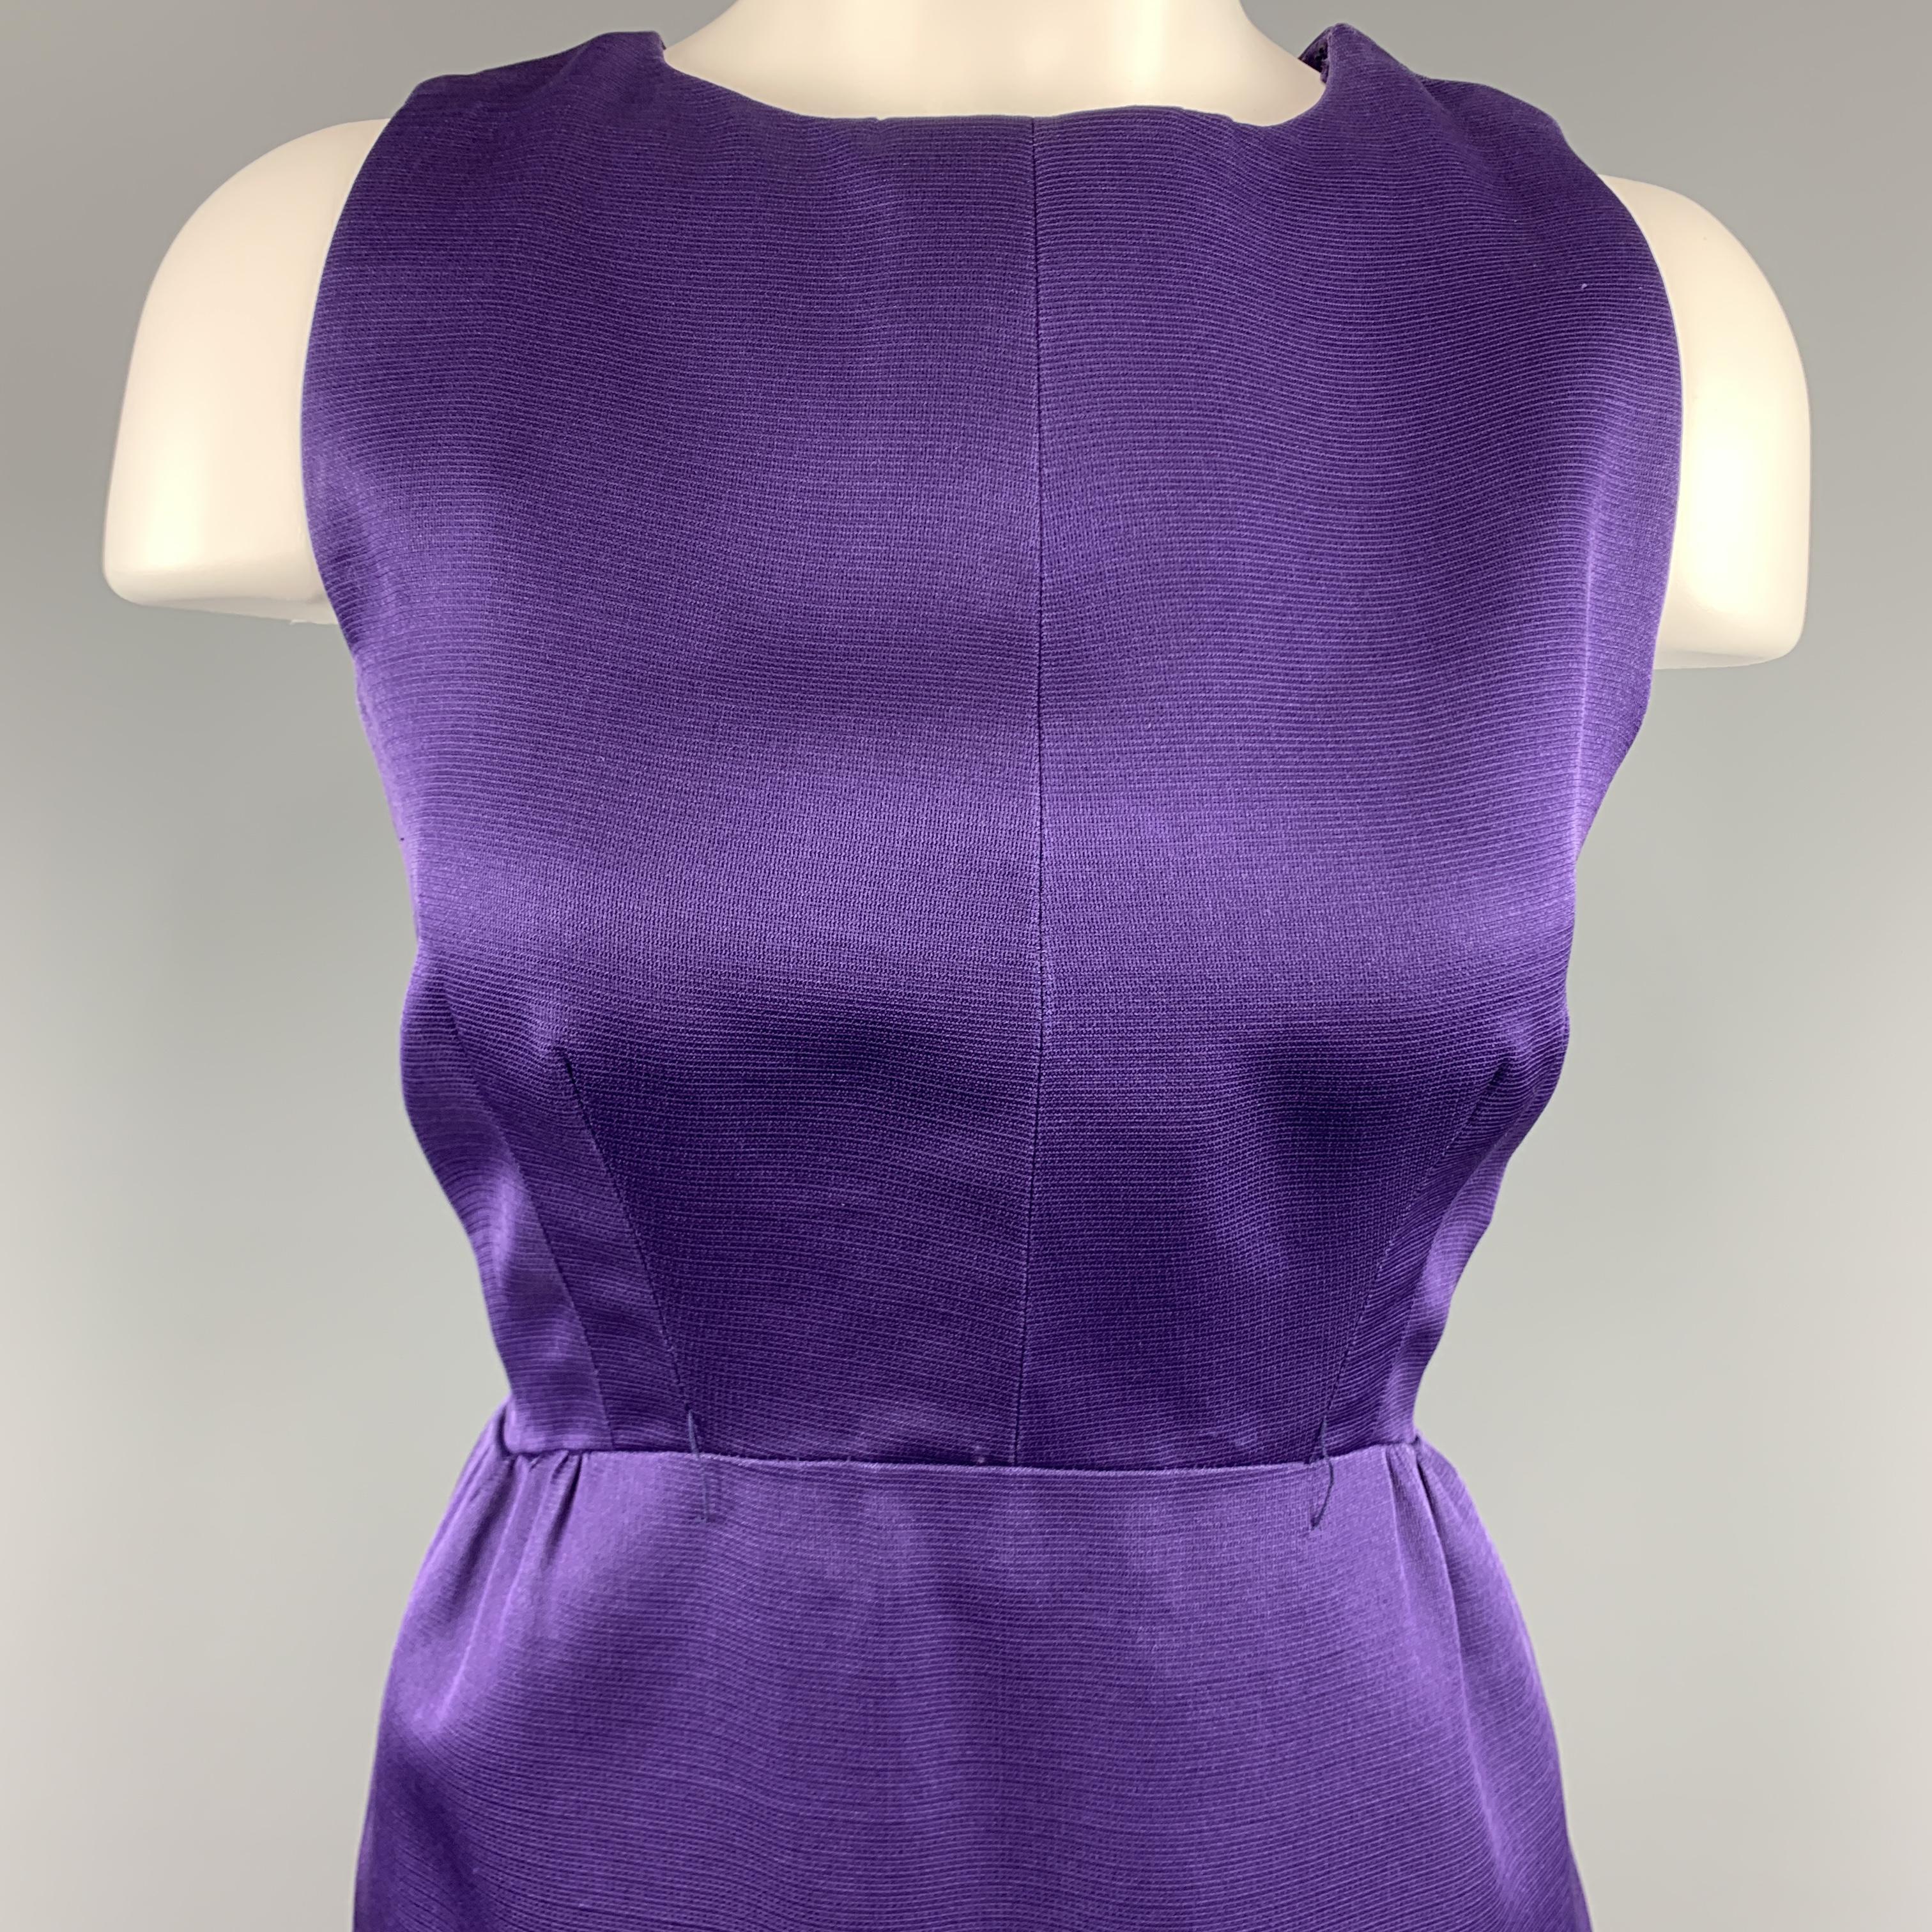 Sleeveless BALENCIAGA cocktail dress comes in structured purple silk with a round neckline, empire waist, and A line skirt with ruffle trim. Wear throughout. Made in France.

Good Pre-Owned Condition.
Marked:  FR 38

Measurements:

Shoulder: 12